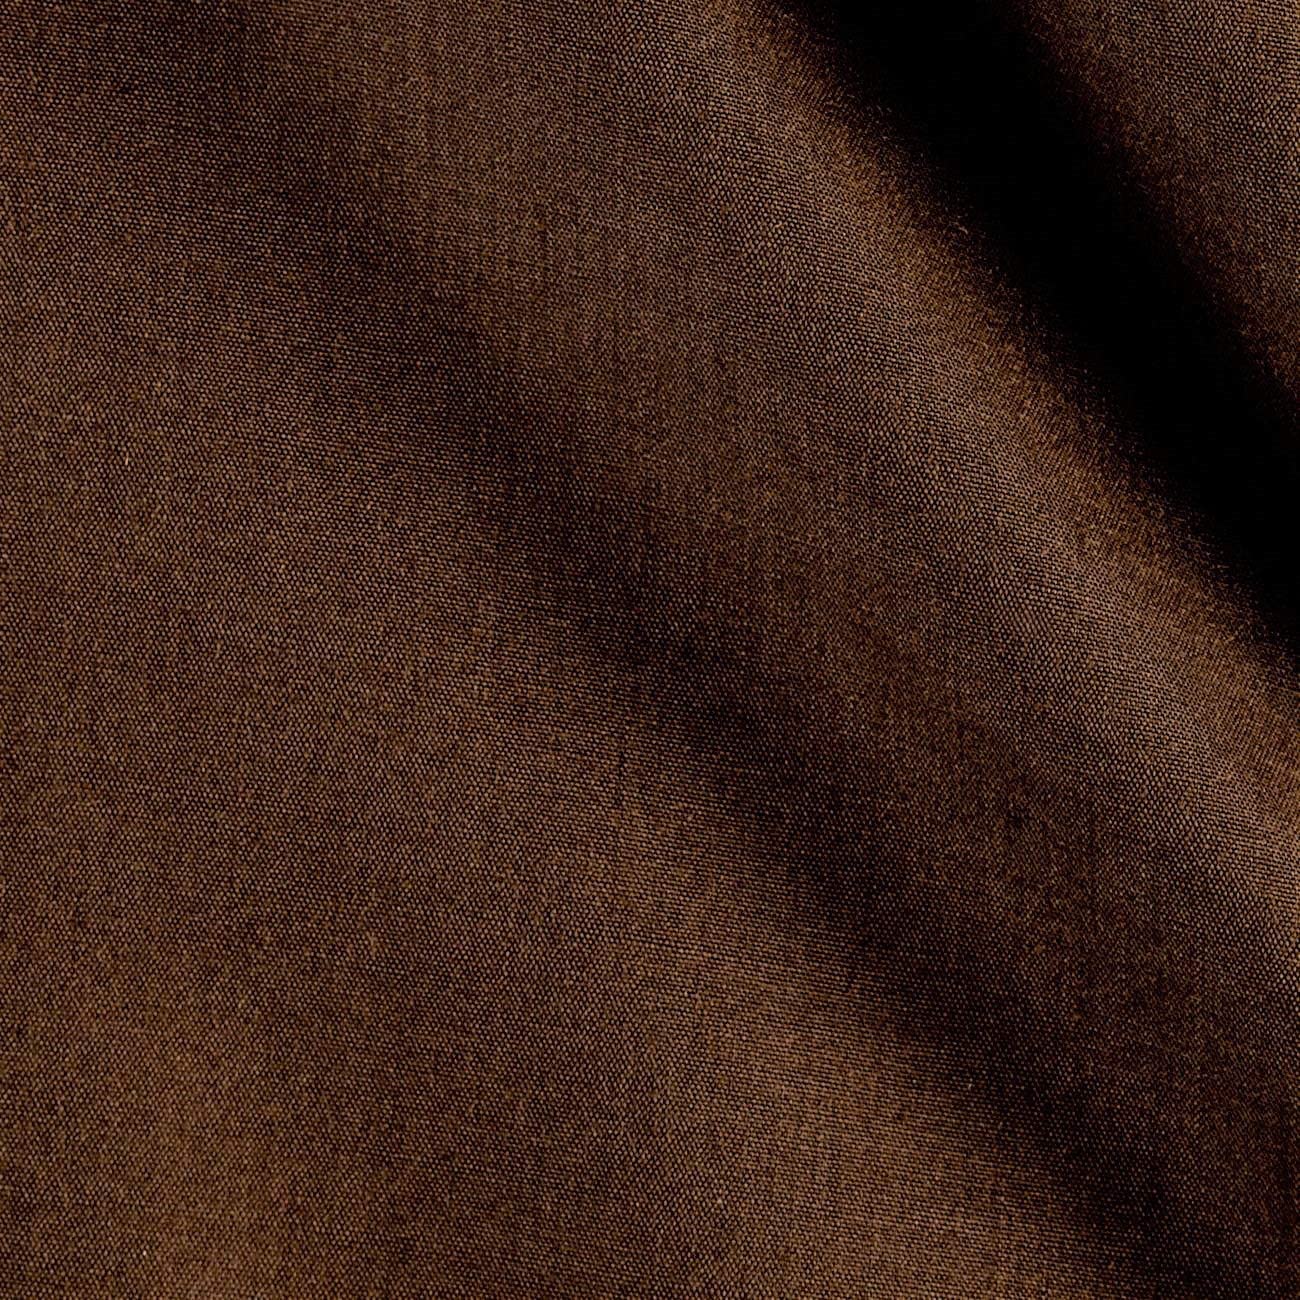 Premium Light Weight Poly Cotton Blend Broadcloth Fabric, Good to Make Face Mask Fabric (Brown, 1 Yard)